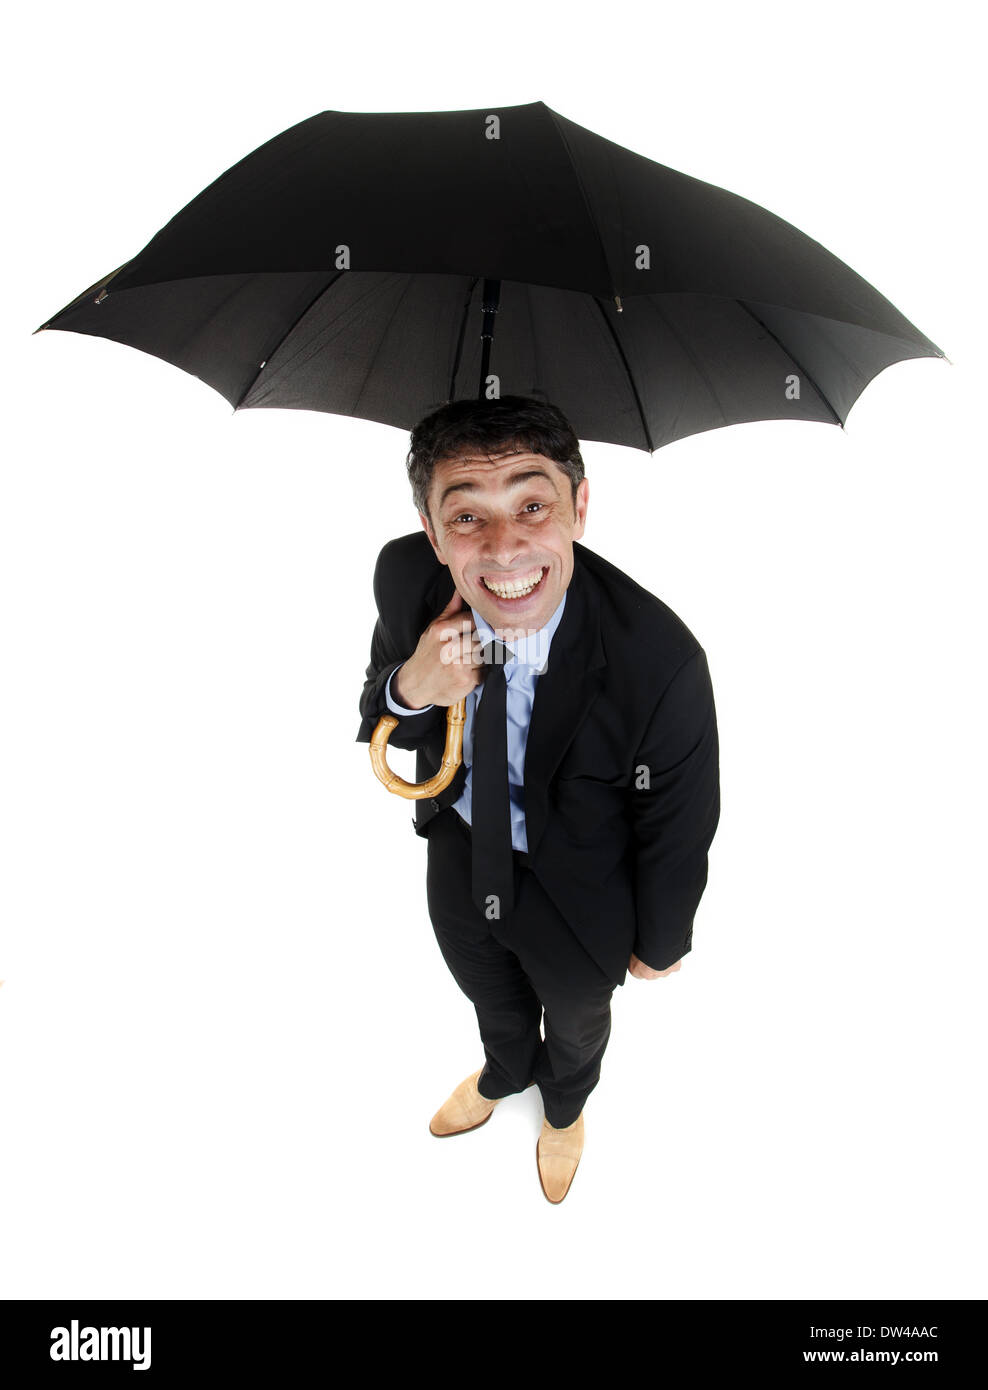 Obsequious businessman sheltering under an umbrella looking up at the camera from underneath with a cheesy insincere smile, high Stock Photo